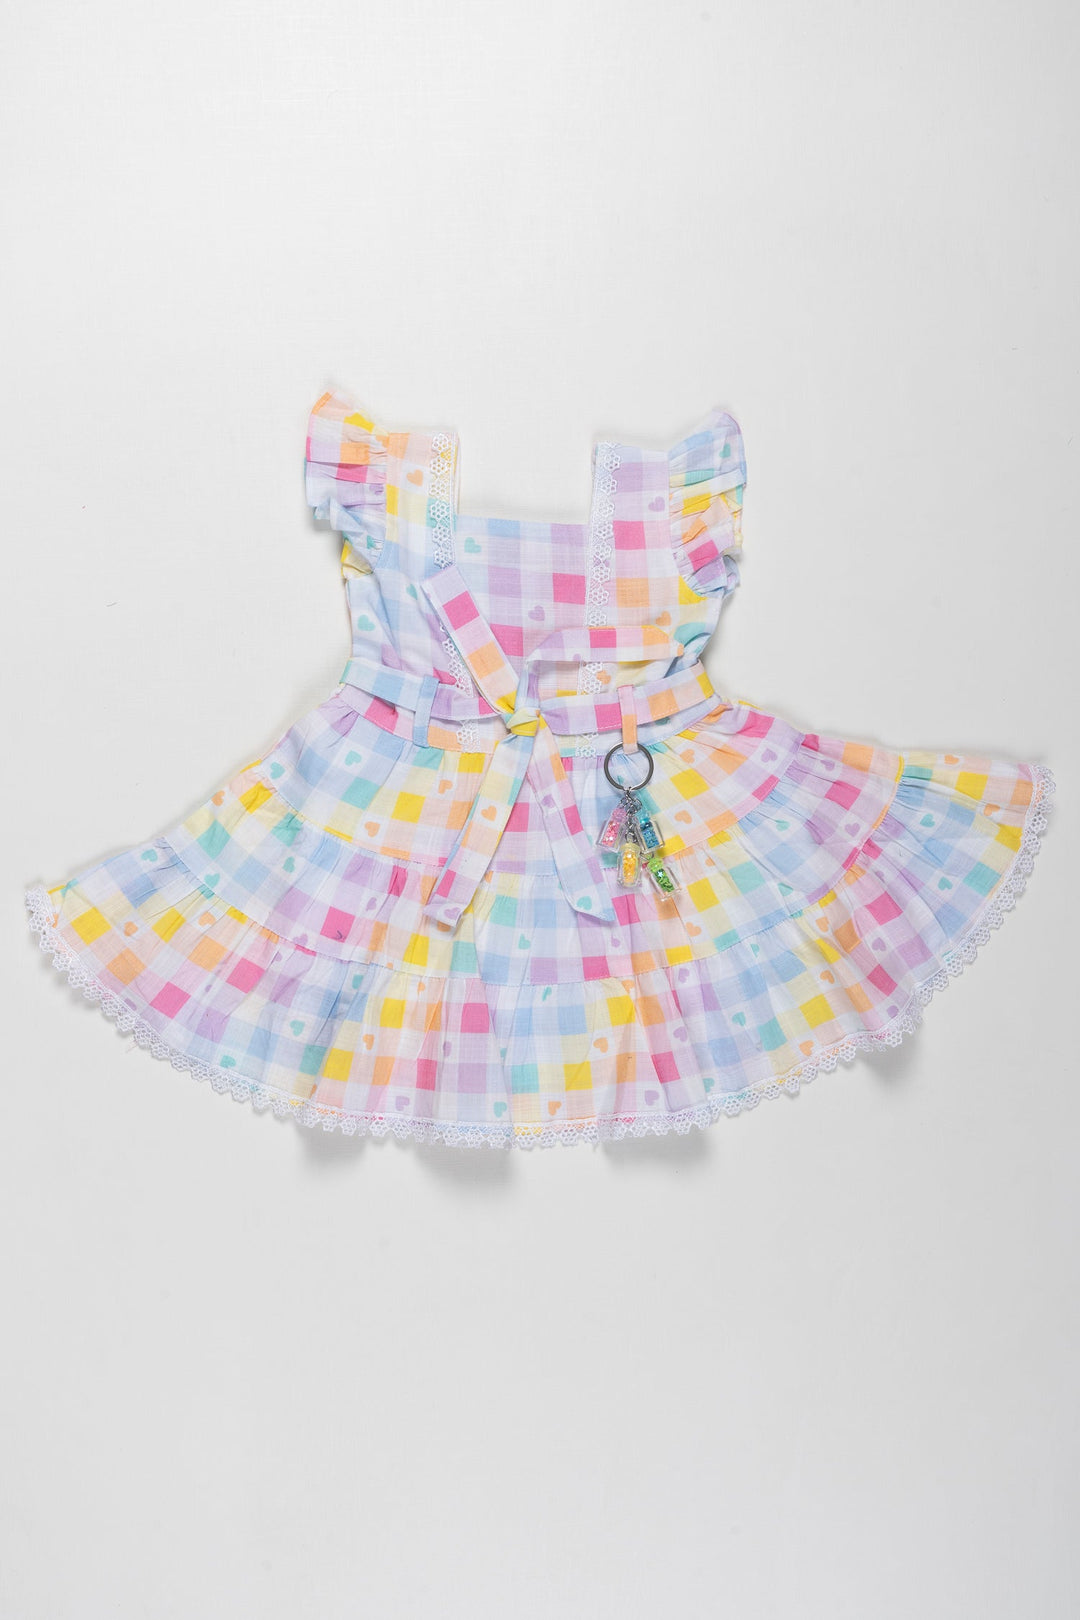 The Nesavu Girls Cotton Frock Pastel Rainbow Checkered Cotton Frock with Hearts for Girls Nesavu 14 (6M) / multicolor / Cotton GFC1286A-14 Colorful Heart Print Cotton Frock for Girls | Designer Daily Wear Dress | The Nesavu